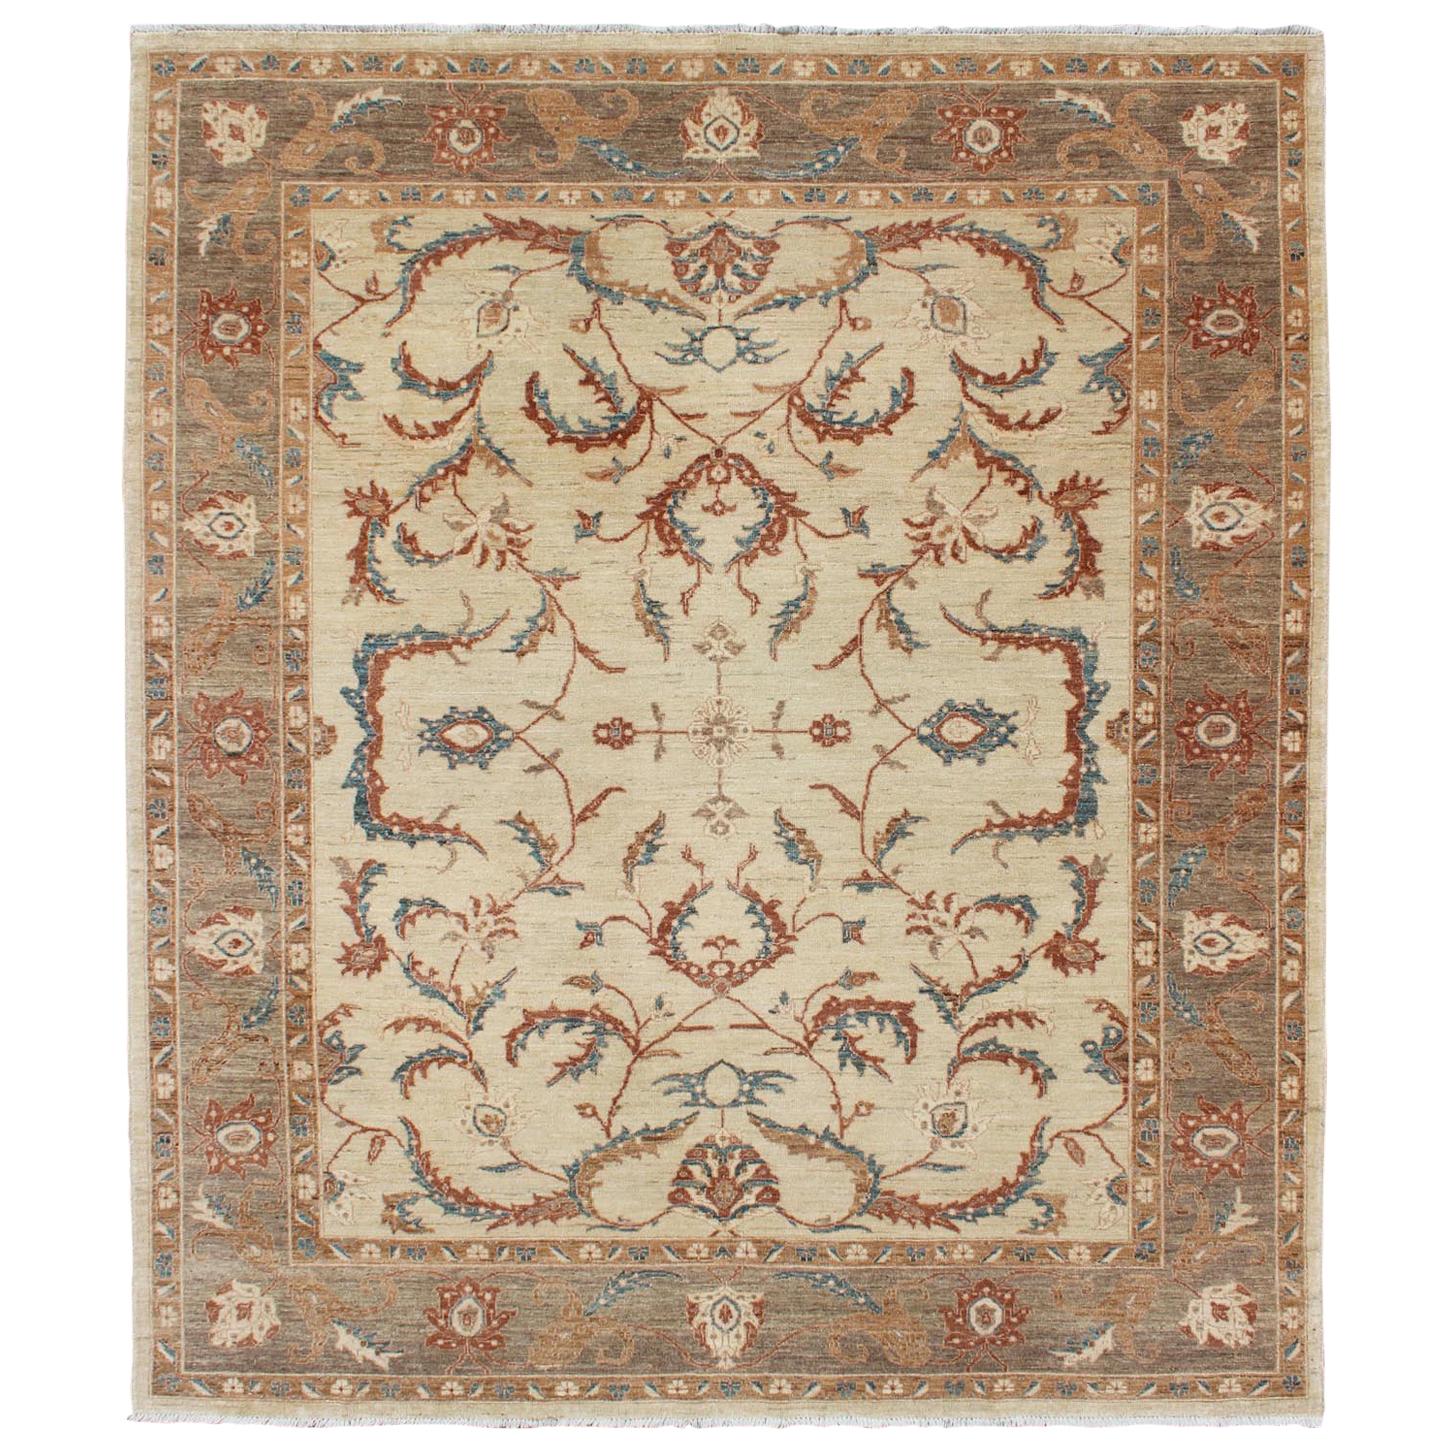 Fine Afghanistan Made Rug in Earthy Tones of Brown, Taupe, Blue, and Coral For Sale